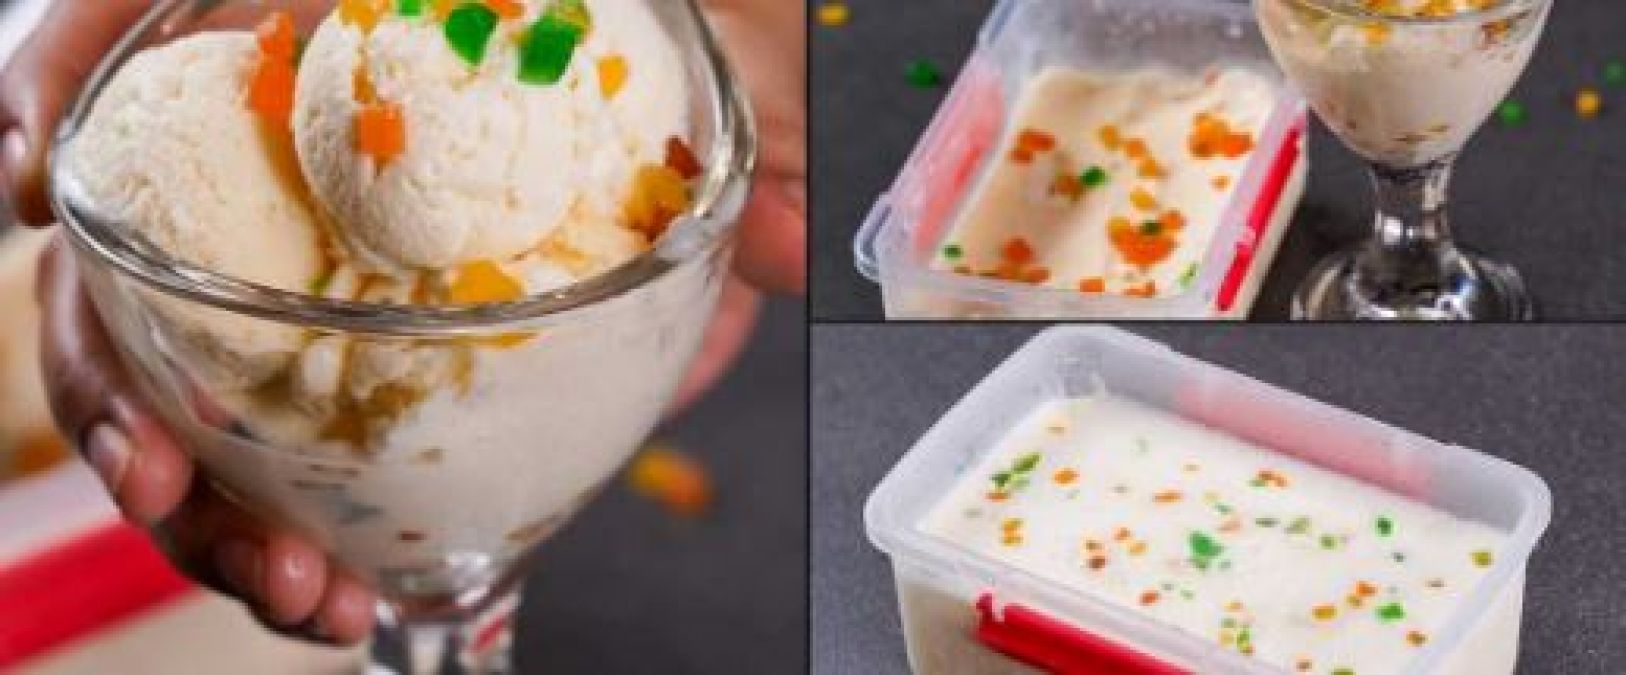 Tutti-Frutti ice cream looks the most wonderful in summer, make it like this